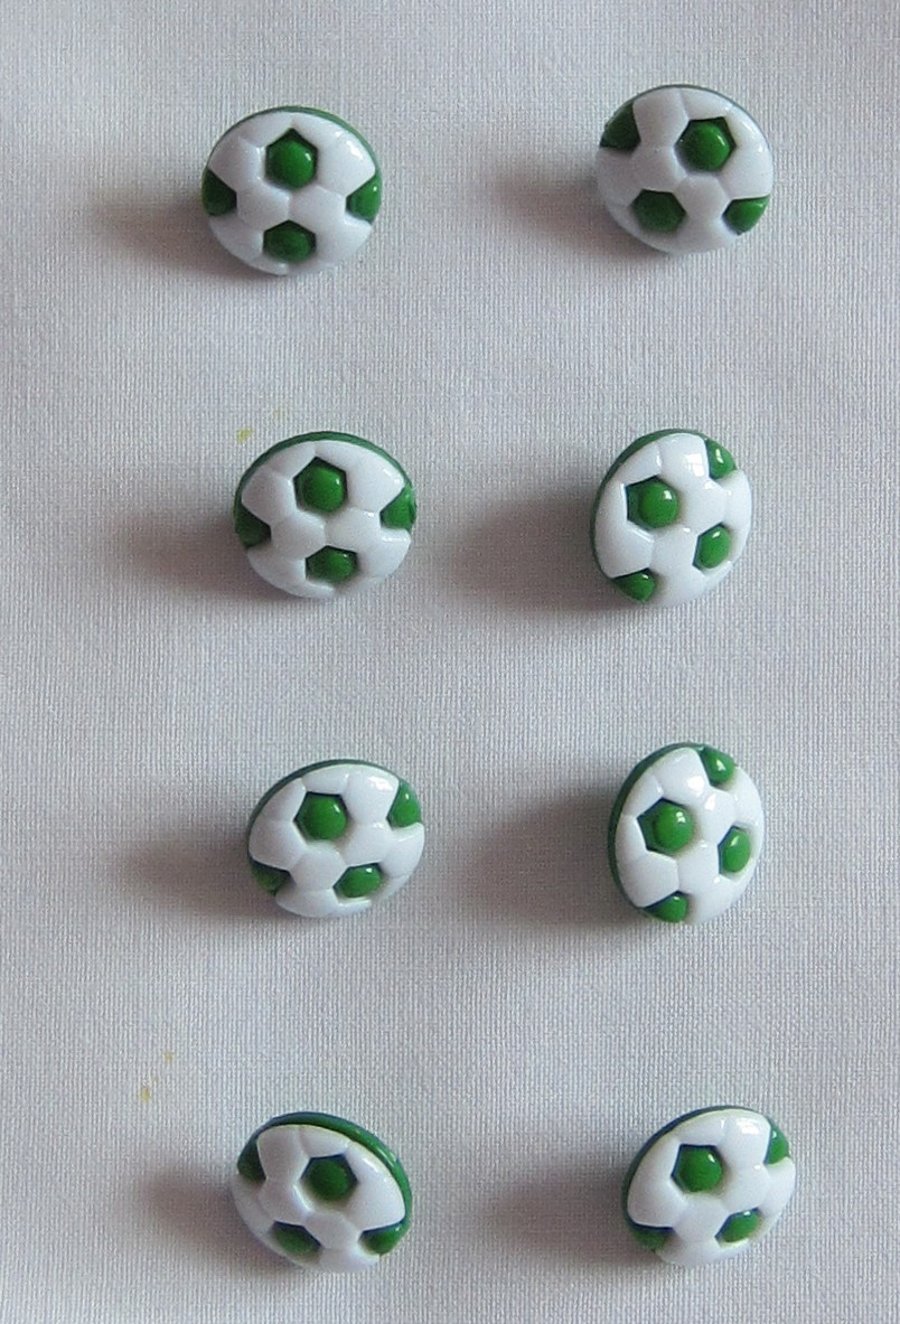 10 Green and White Football Buttons